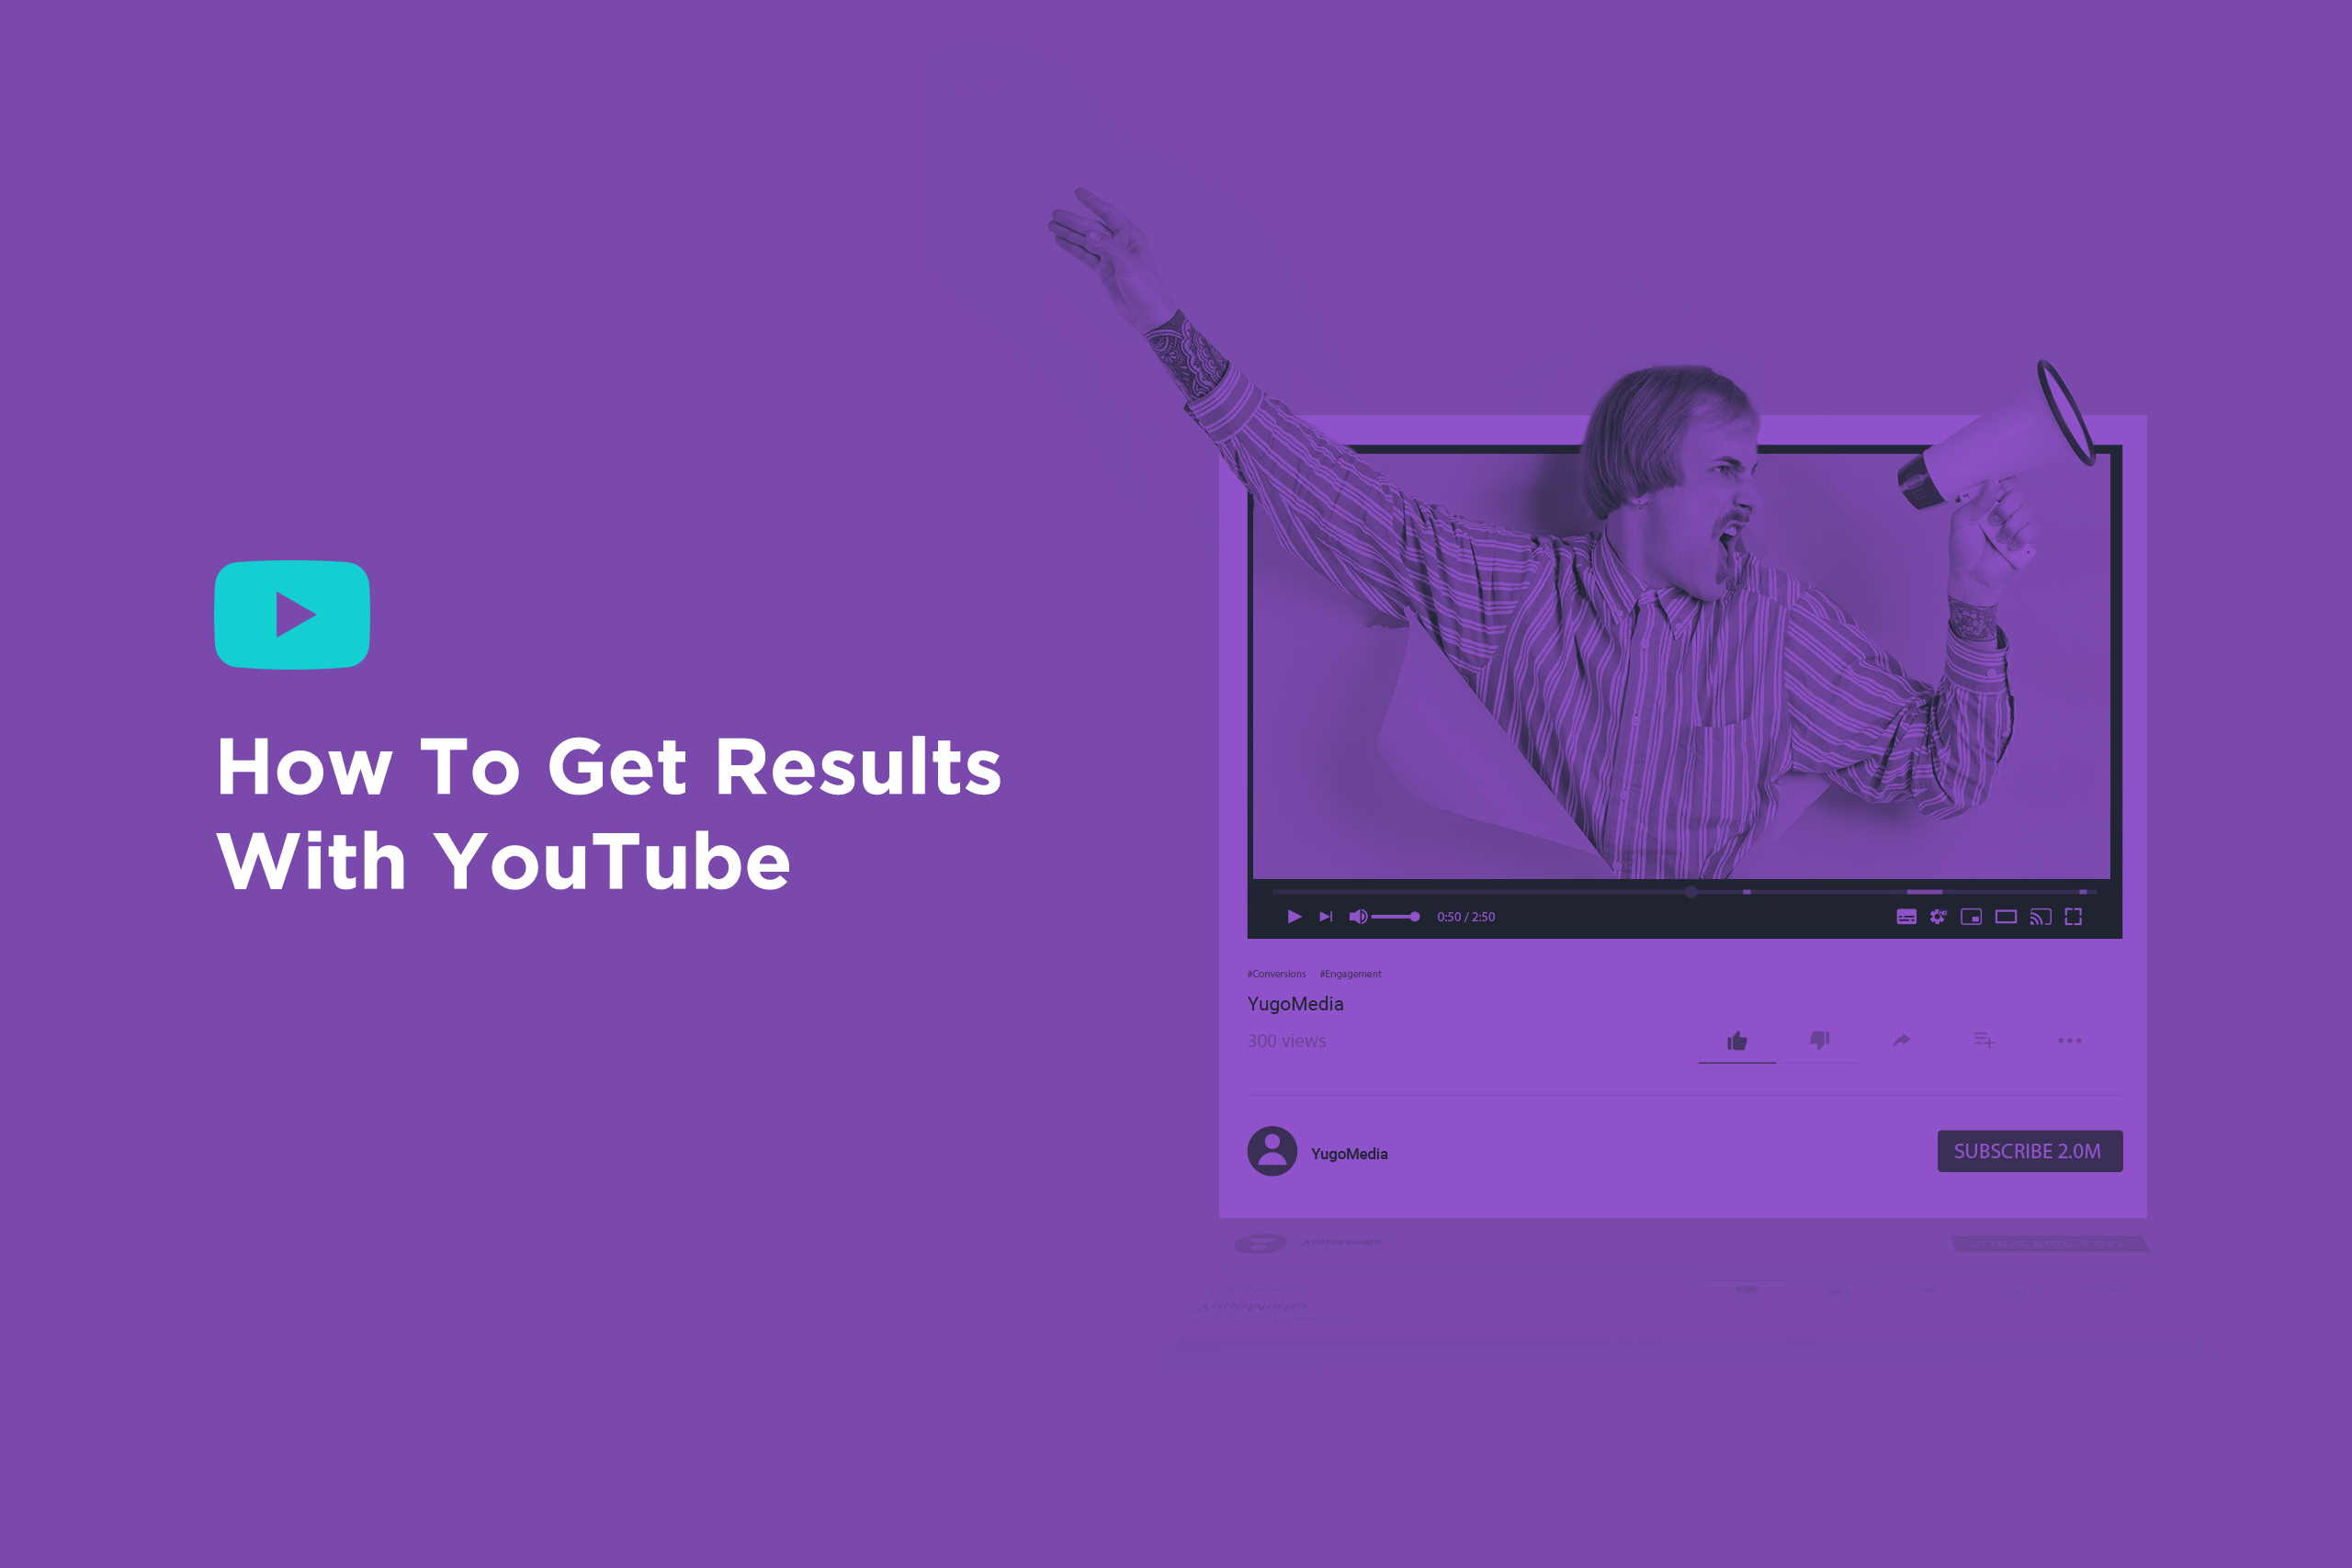 Get Results With YouTube In-Stream Ads